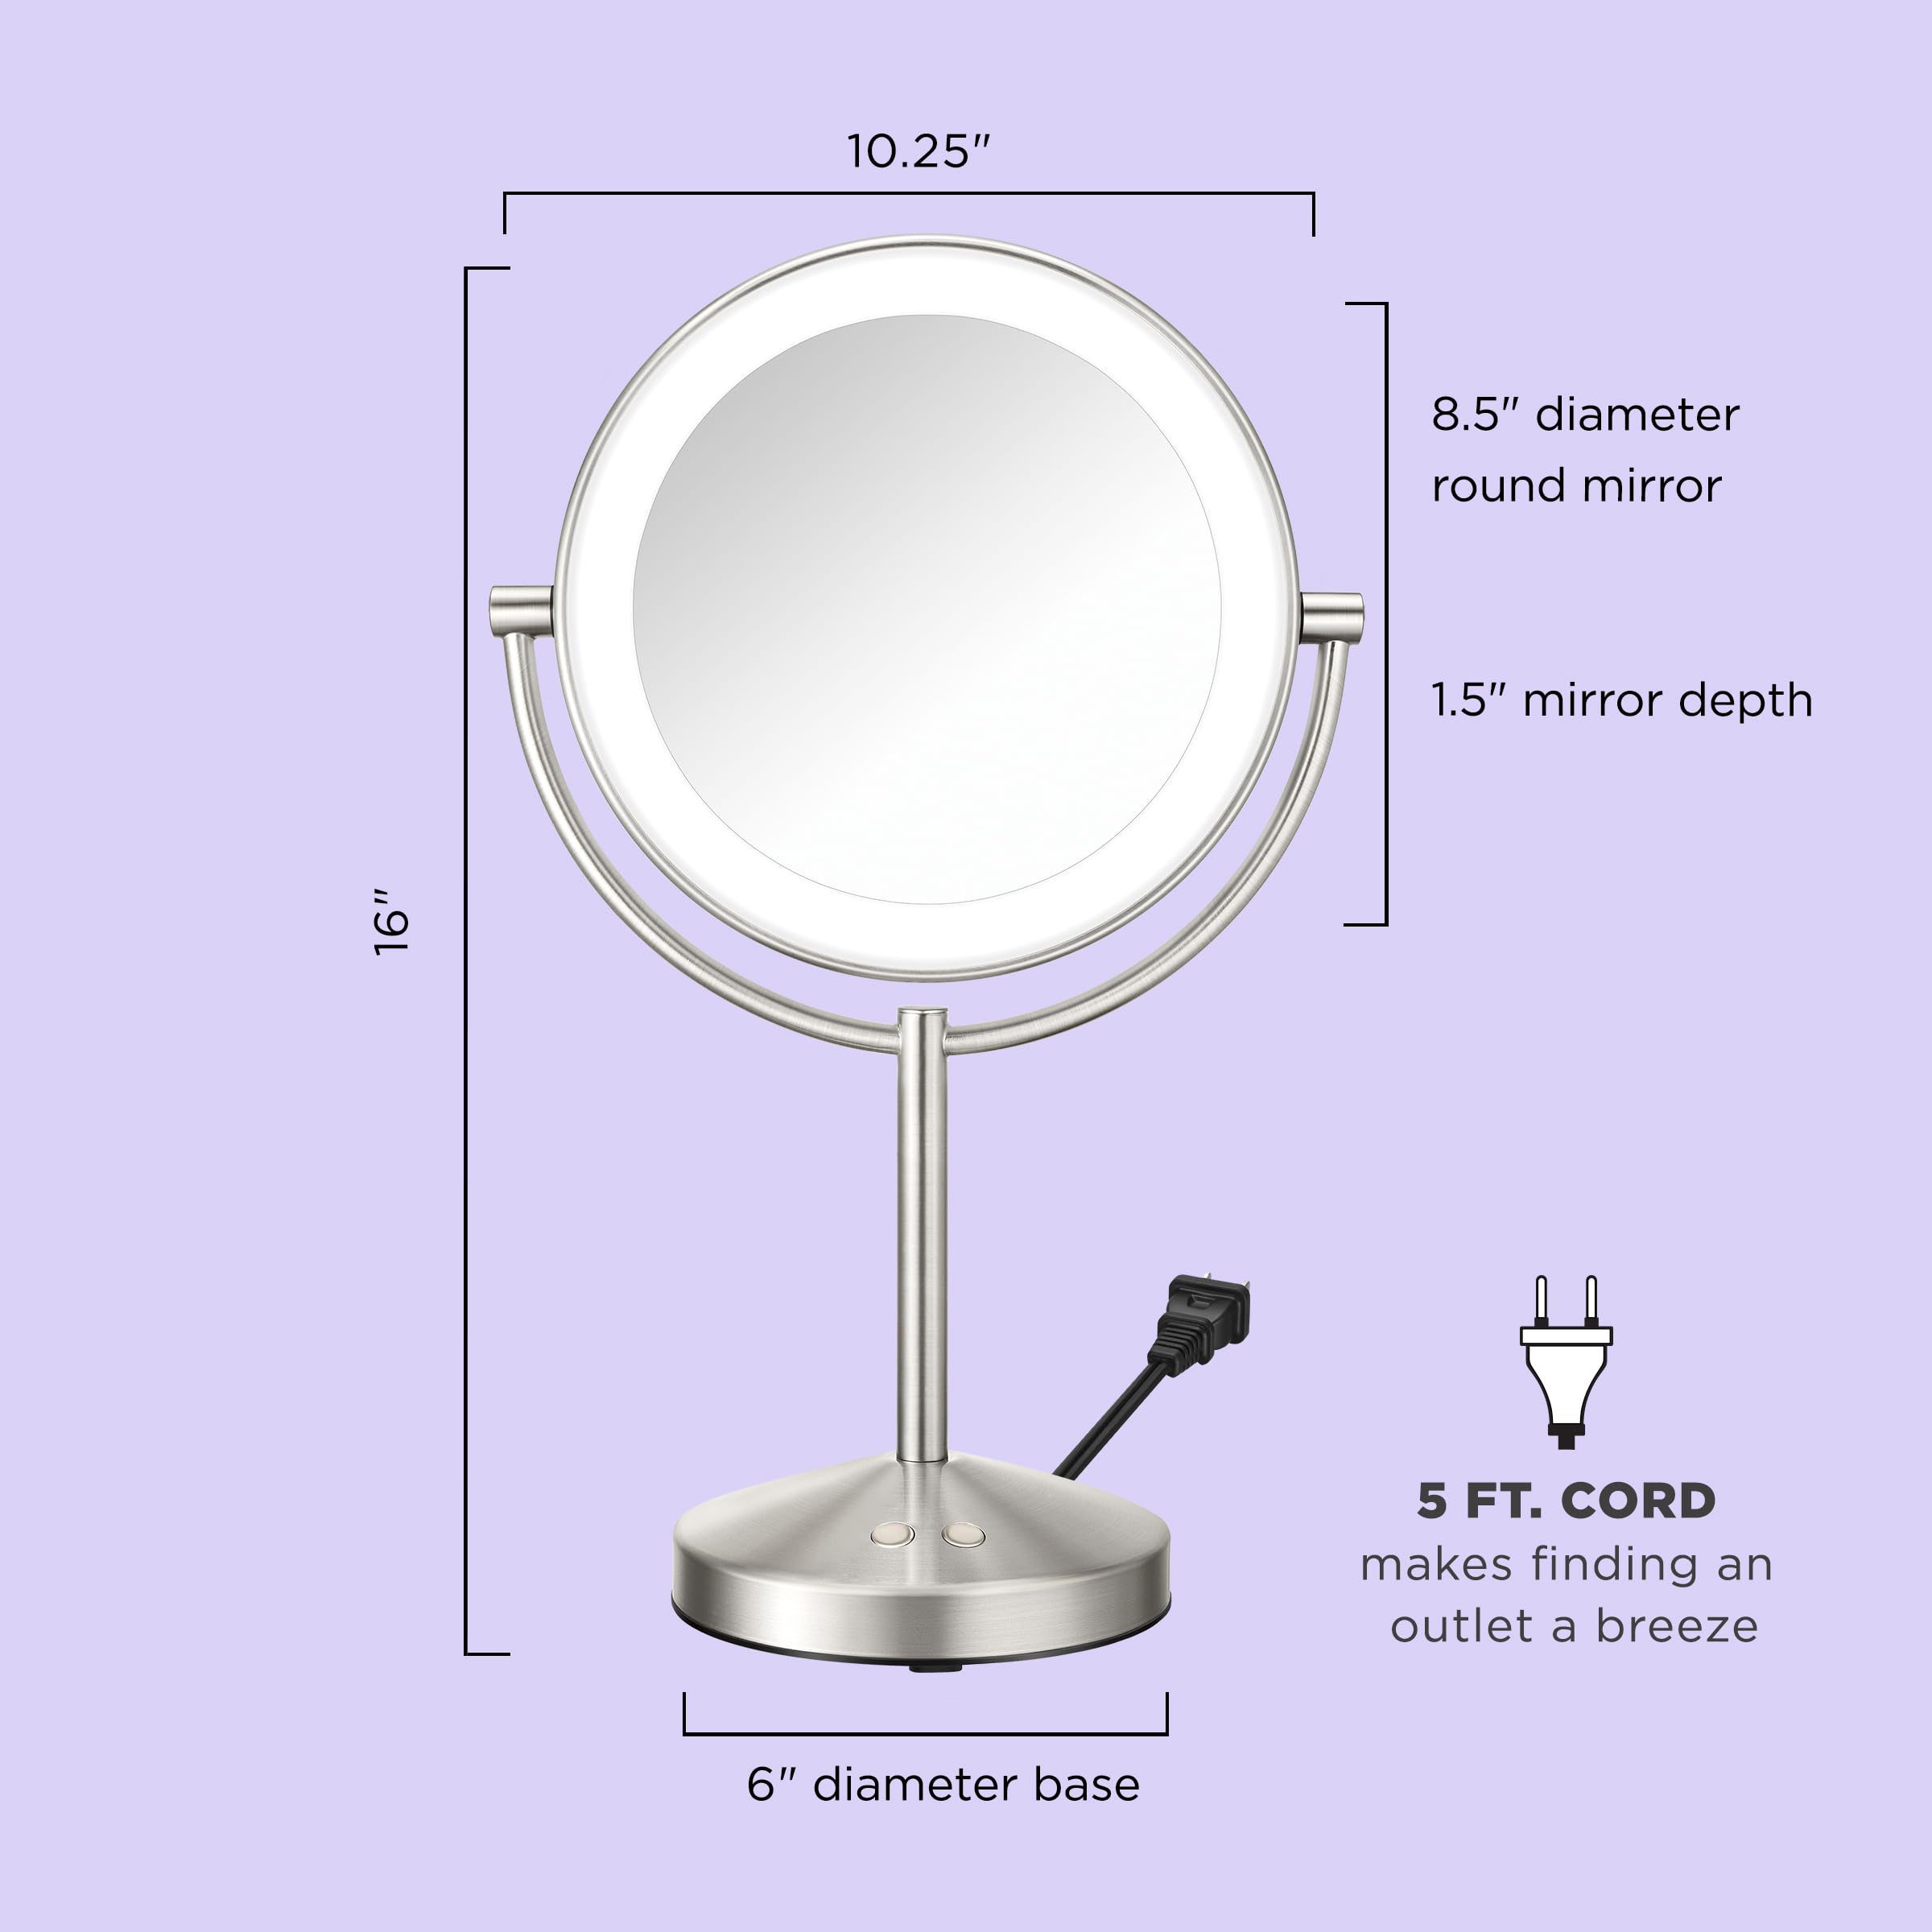 Conair Lighted Makeup Mirror, LED Vanity Mirror, 1X/10x Magnifying Mirror, Corded in Satin Nickel Finish